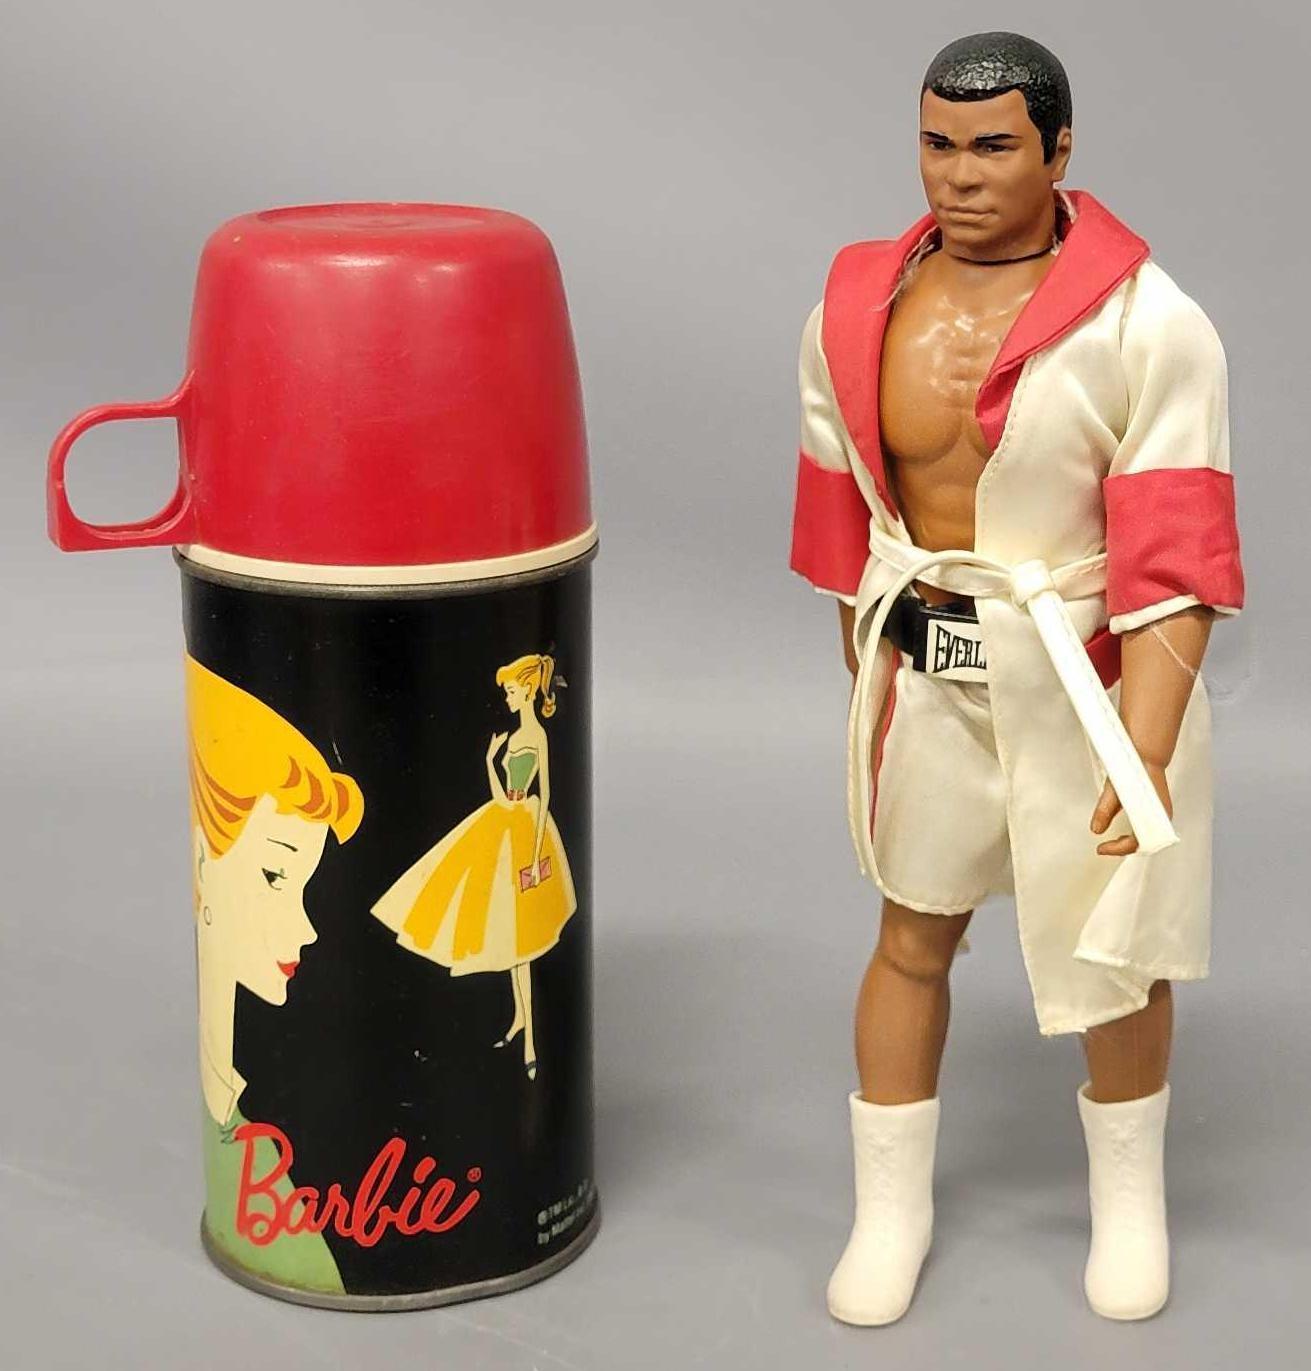 Mego Muhammad Ali and a Barbie thermos